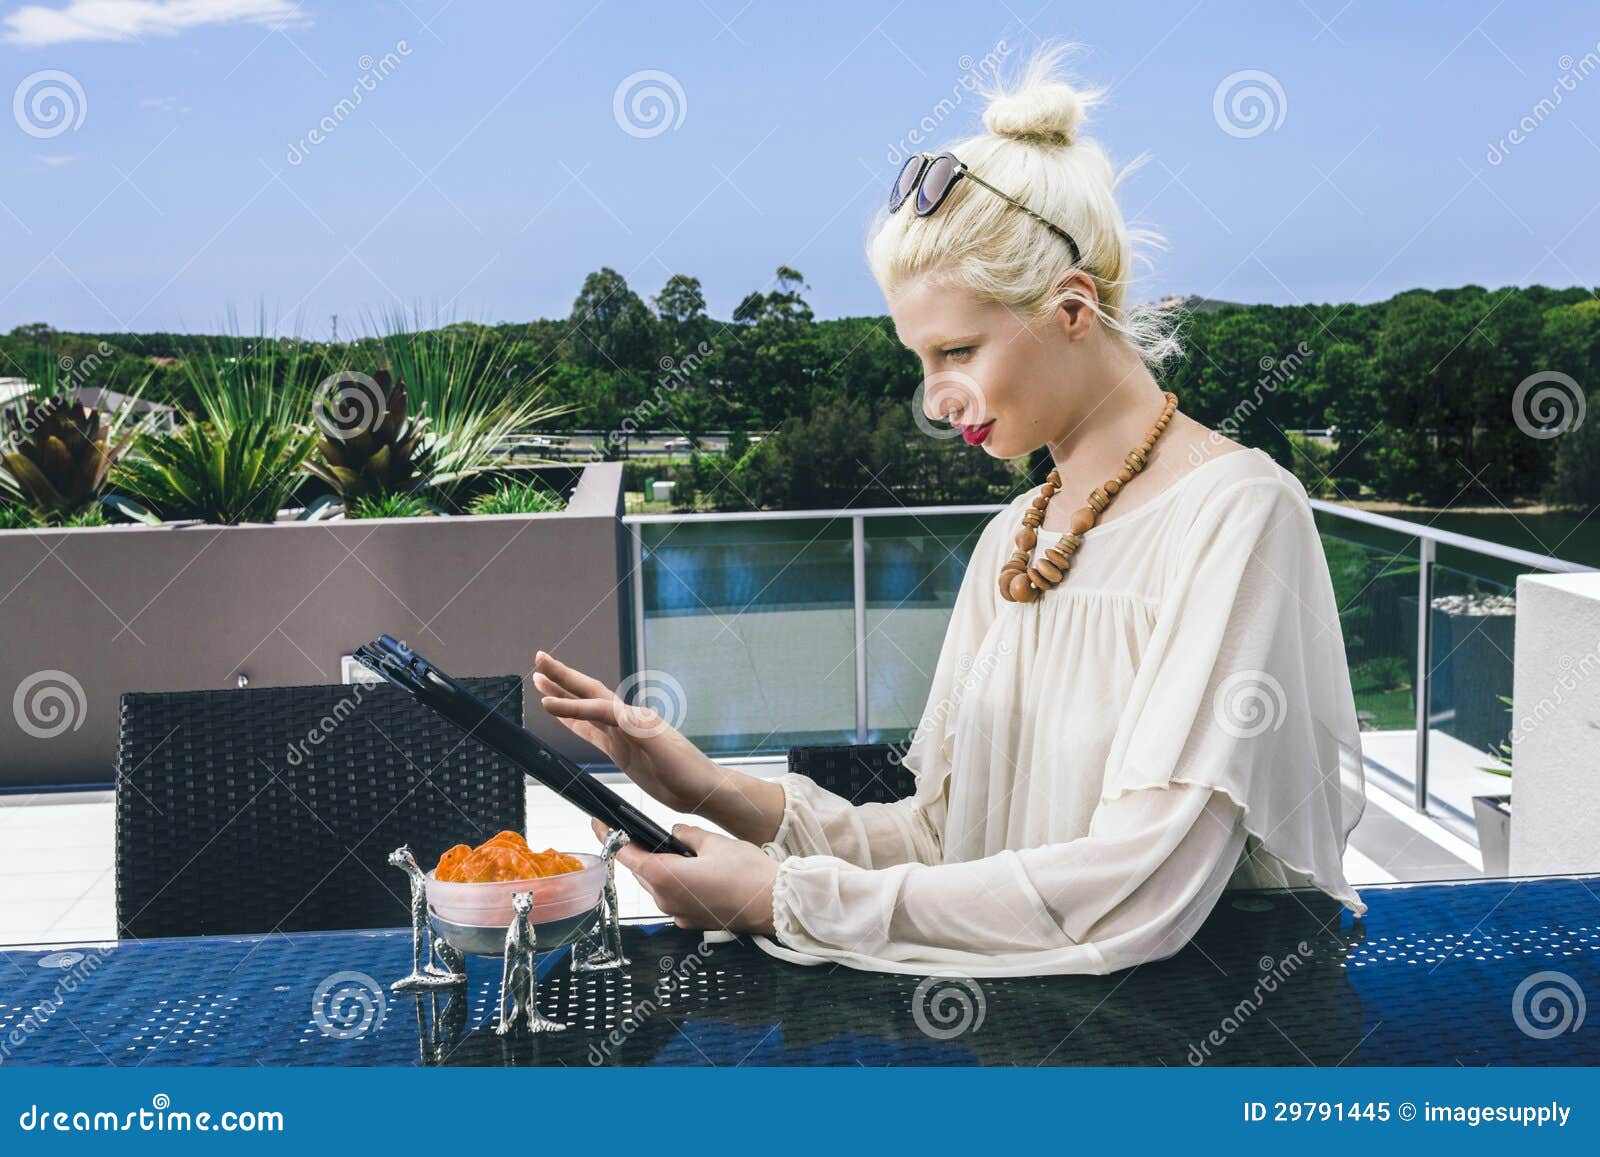 Woman surfing the net stock image. Image of caucasian - 29791445